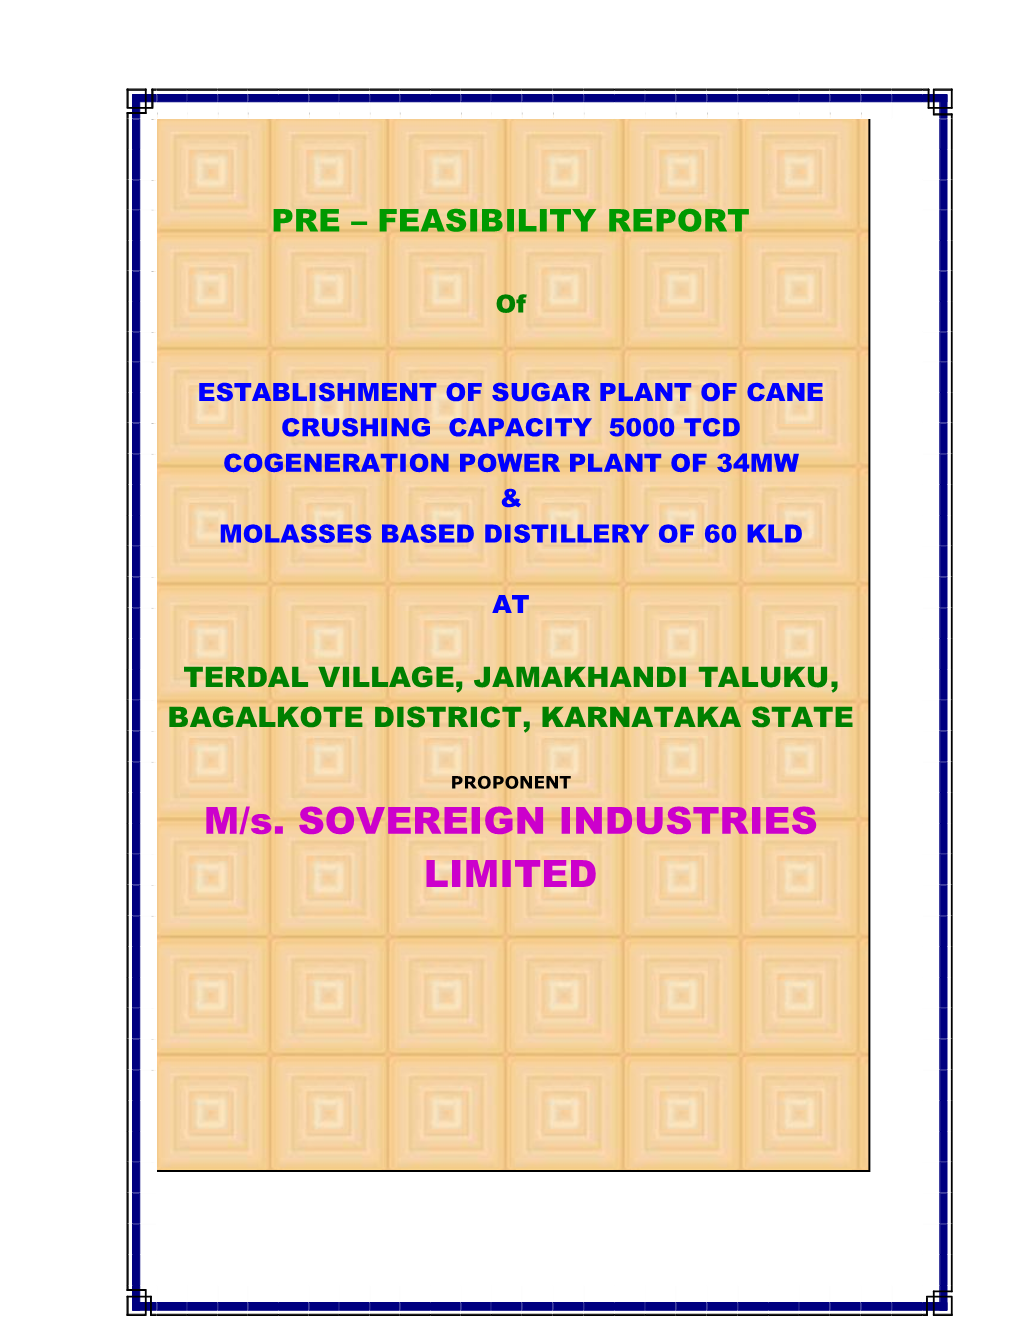 M/S. SOVEREIGN INDUSTRIES LIMITED